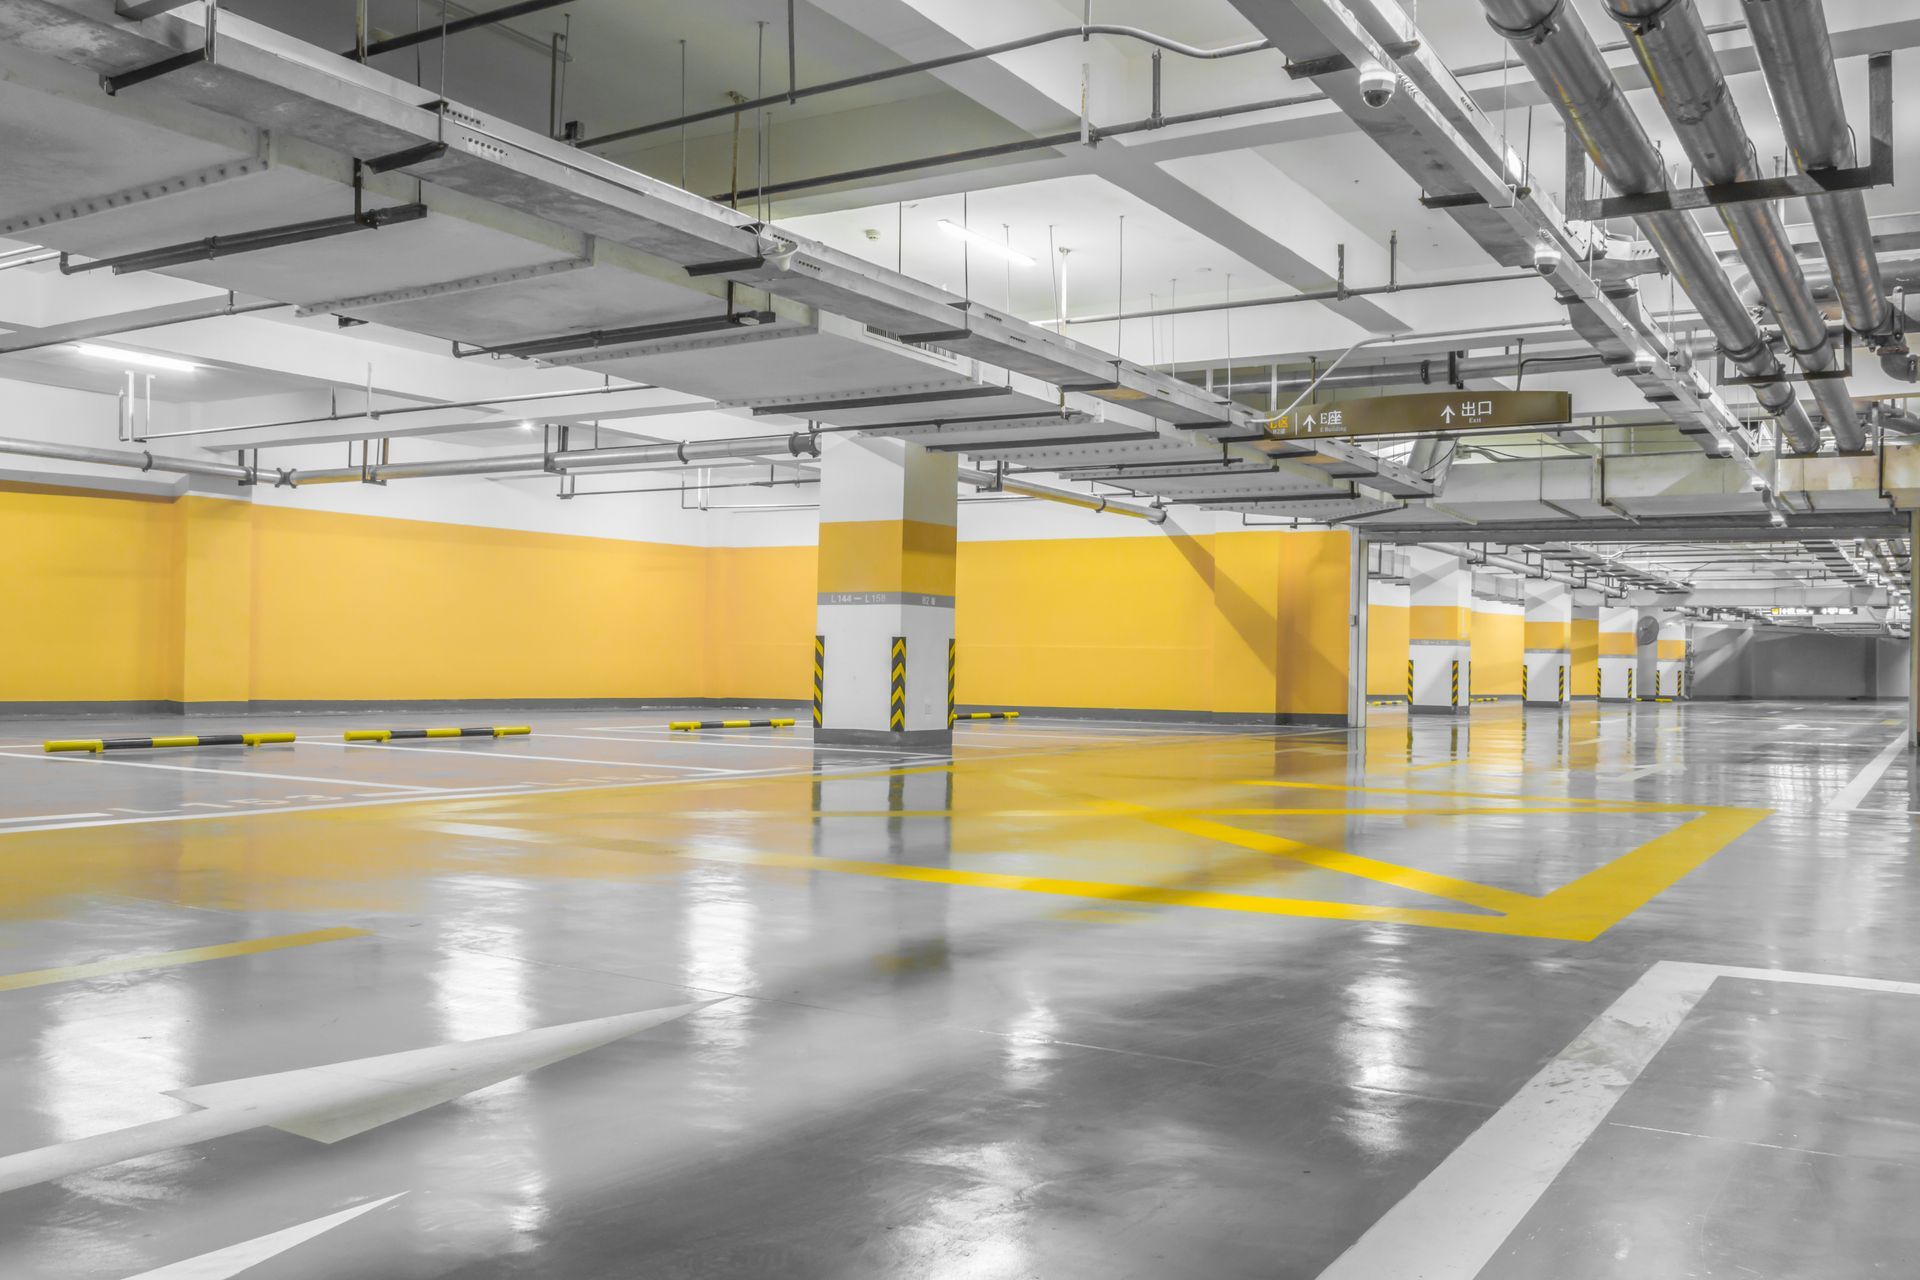 An empty parking garage with yellow walls and a concrete floor.